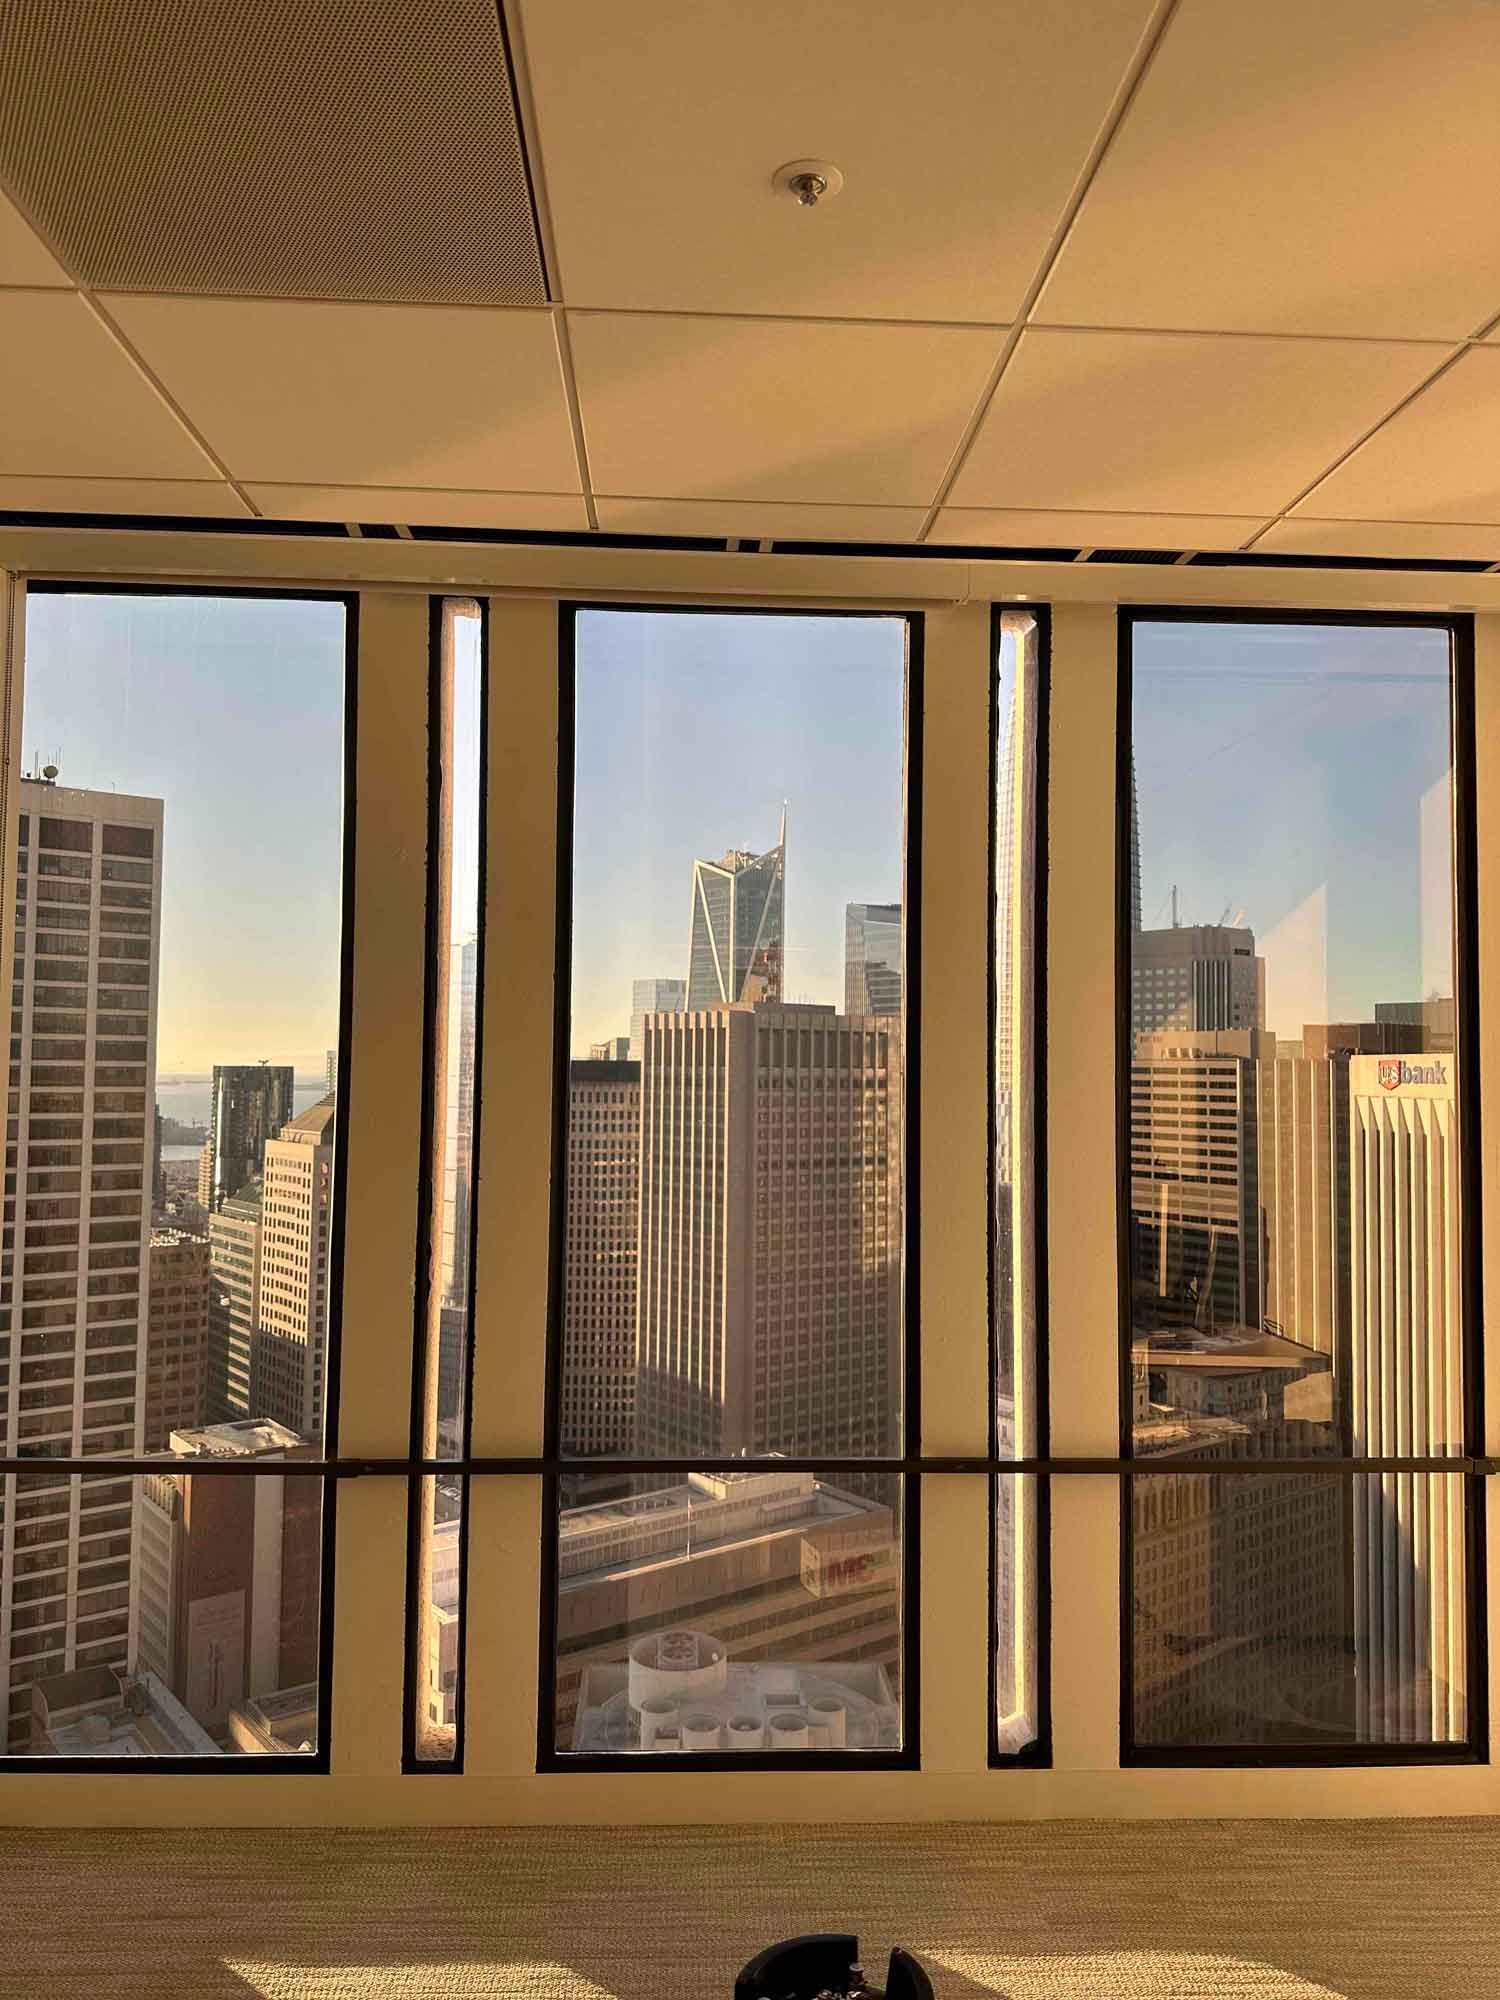 How can you reduce glare, heat and the cost of cooling your office? 3M Night Vision window film, installed by ClimatePro. Free estimate for the San Francisco Bay Area.